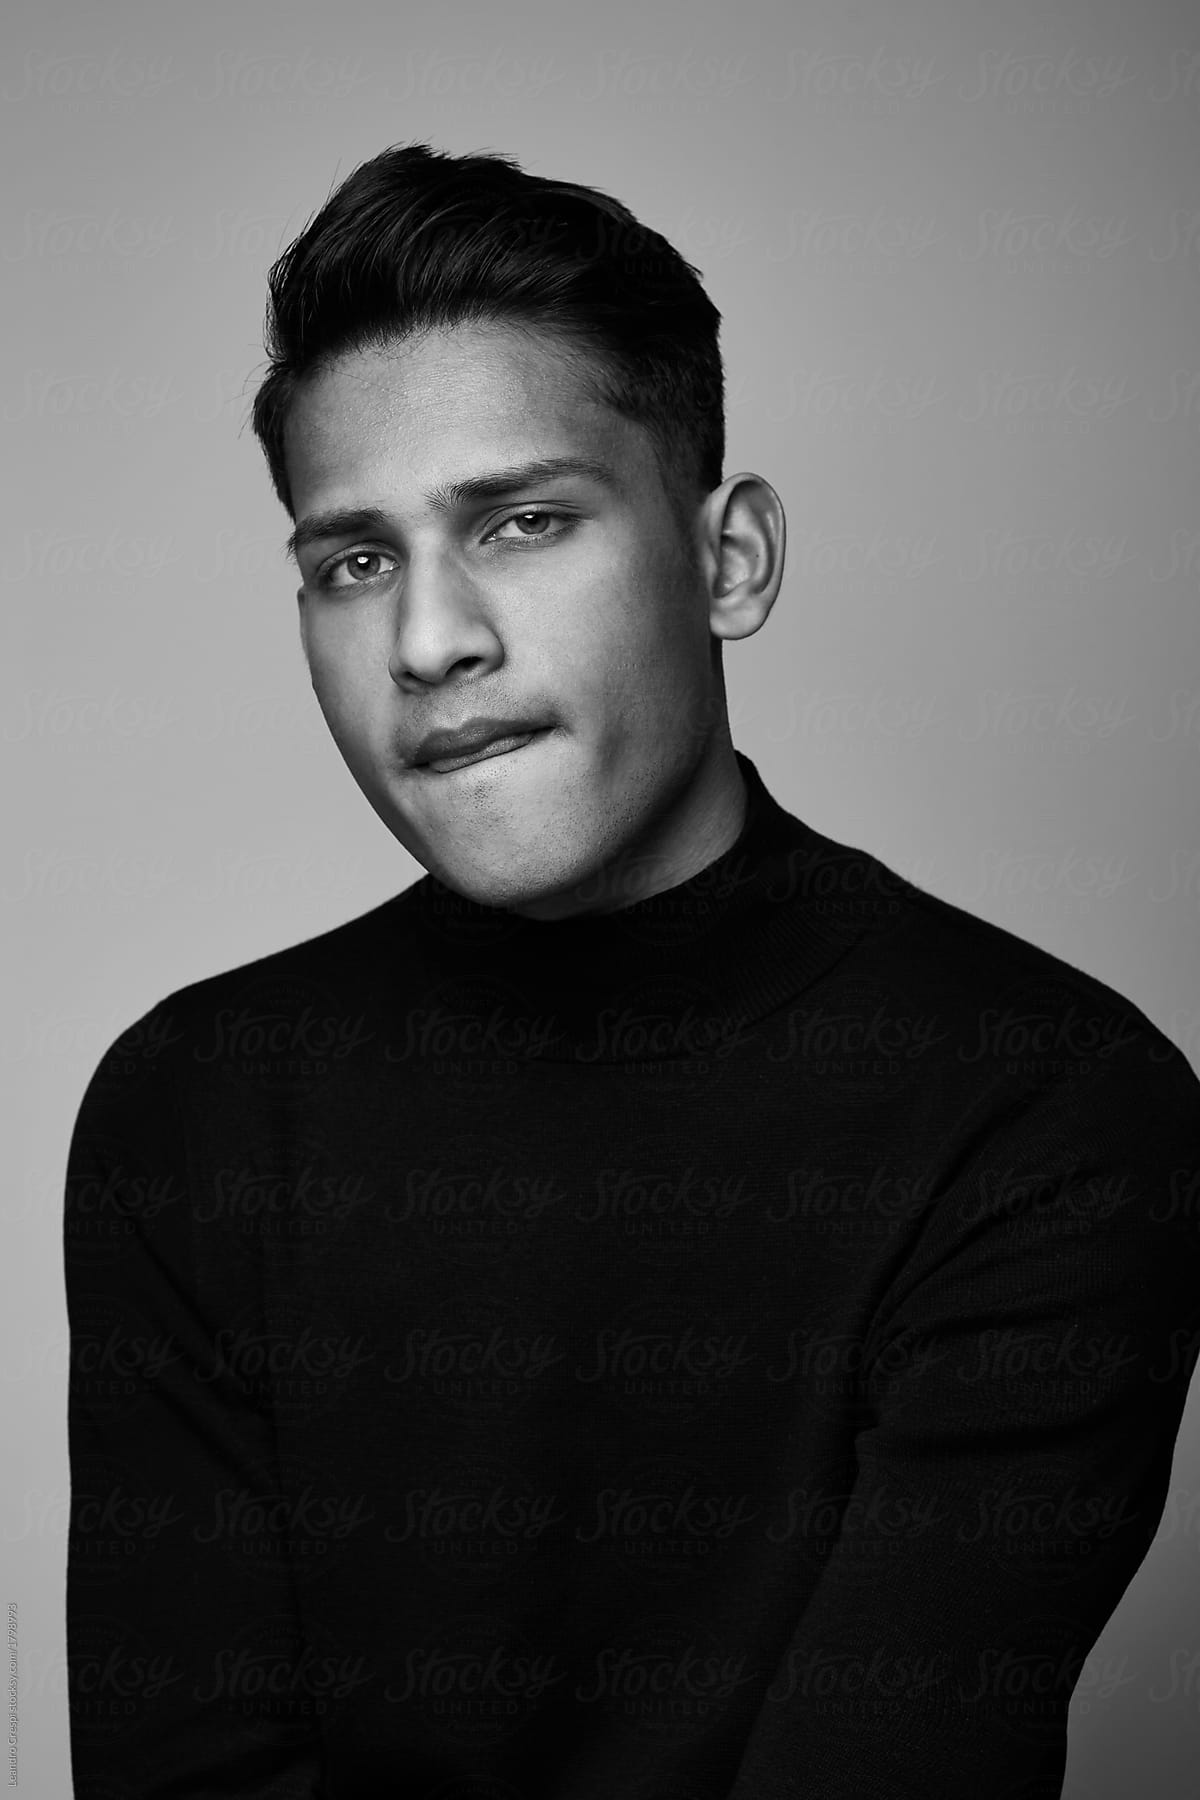 Handsome Indian guy portrait wearing turtle neck isolated on black and white